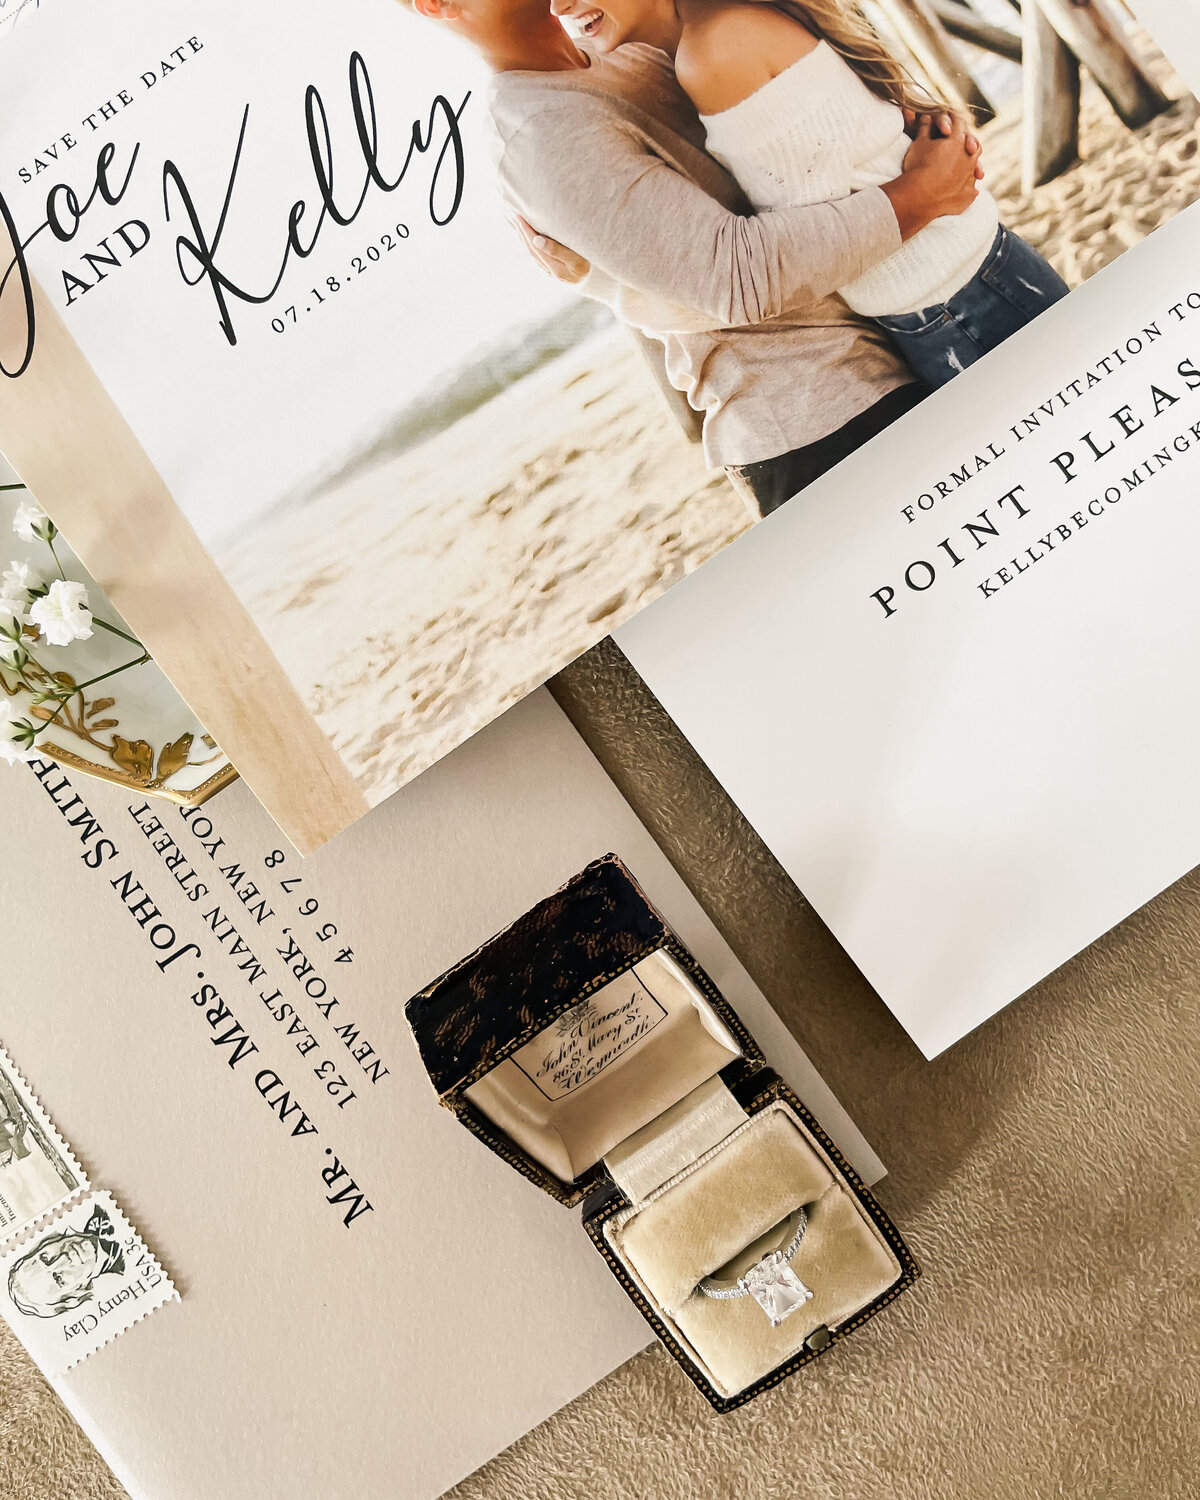 Jersey-Shore-Wedding-Save-the-Dates-10